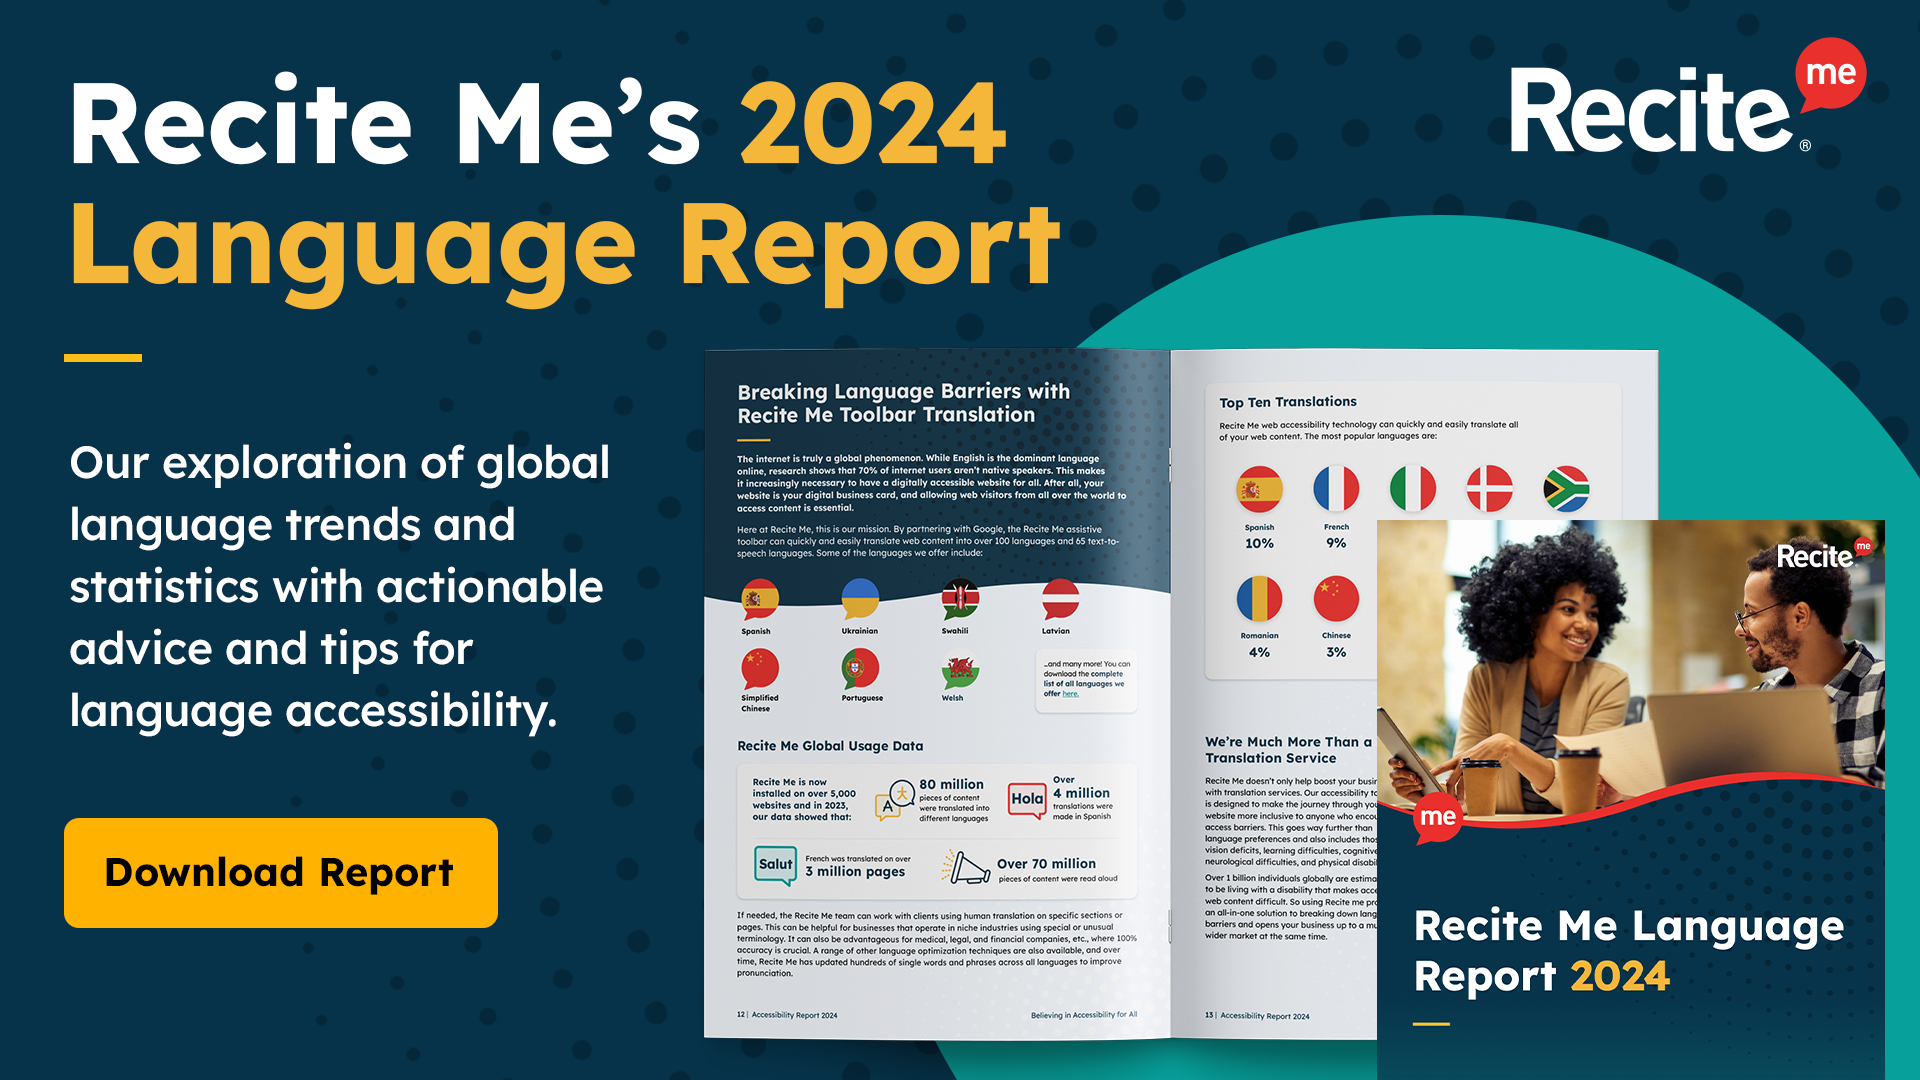 Recite Me's 2024 Language Report. Our exploration of global language trends and statistics with actionable advice and tips for language accessibility. Mock-up of Recite Me's language report.